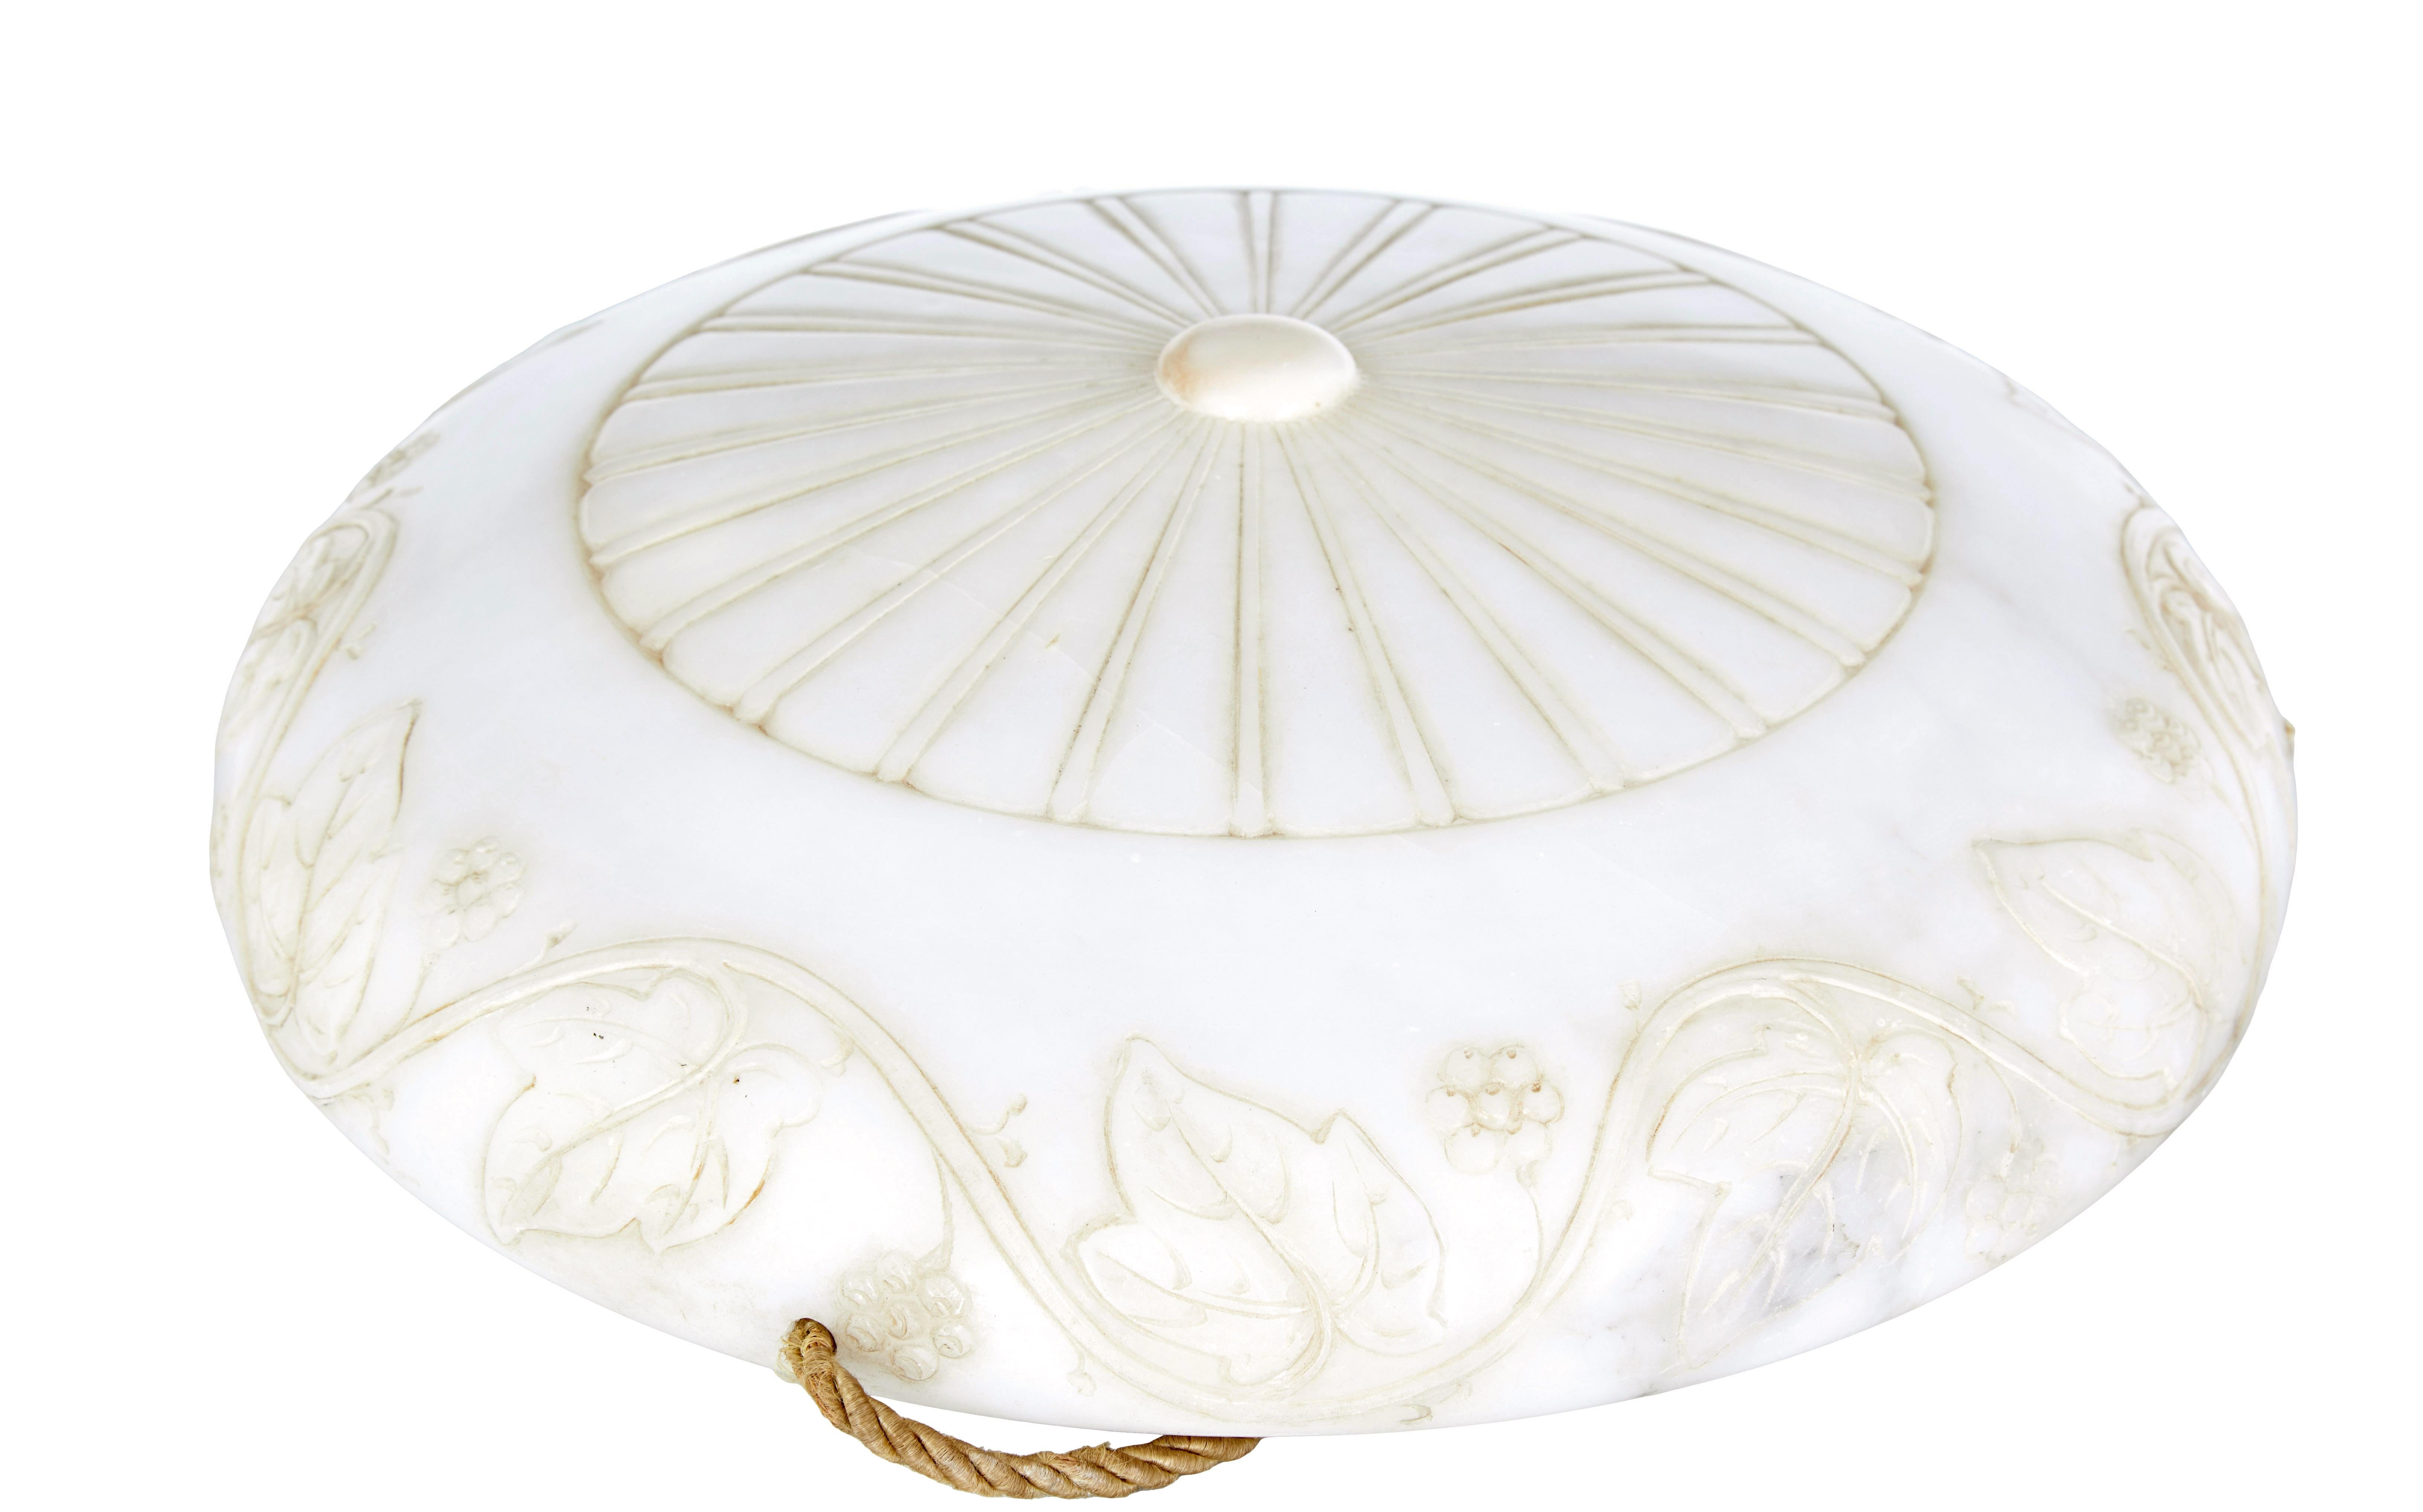 Art deco alabaster and brass pendant light circa 1930.

Beautiful quality carved alabaster hanging ceiling dish light.

Circular bowl with carved round fan to the centre of the base, and flowing carved acanthus leaves around the rim.  Suspended by 3